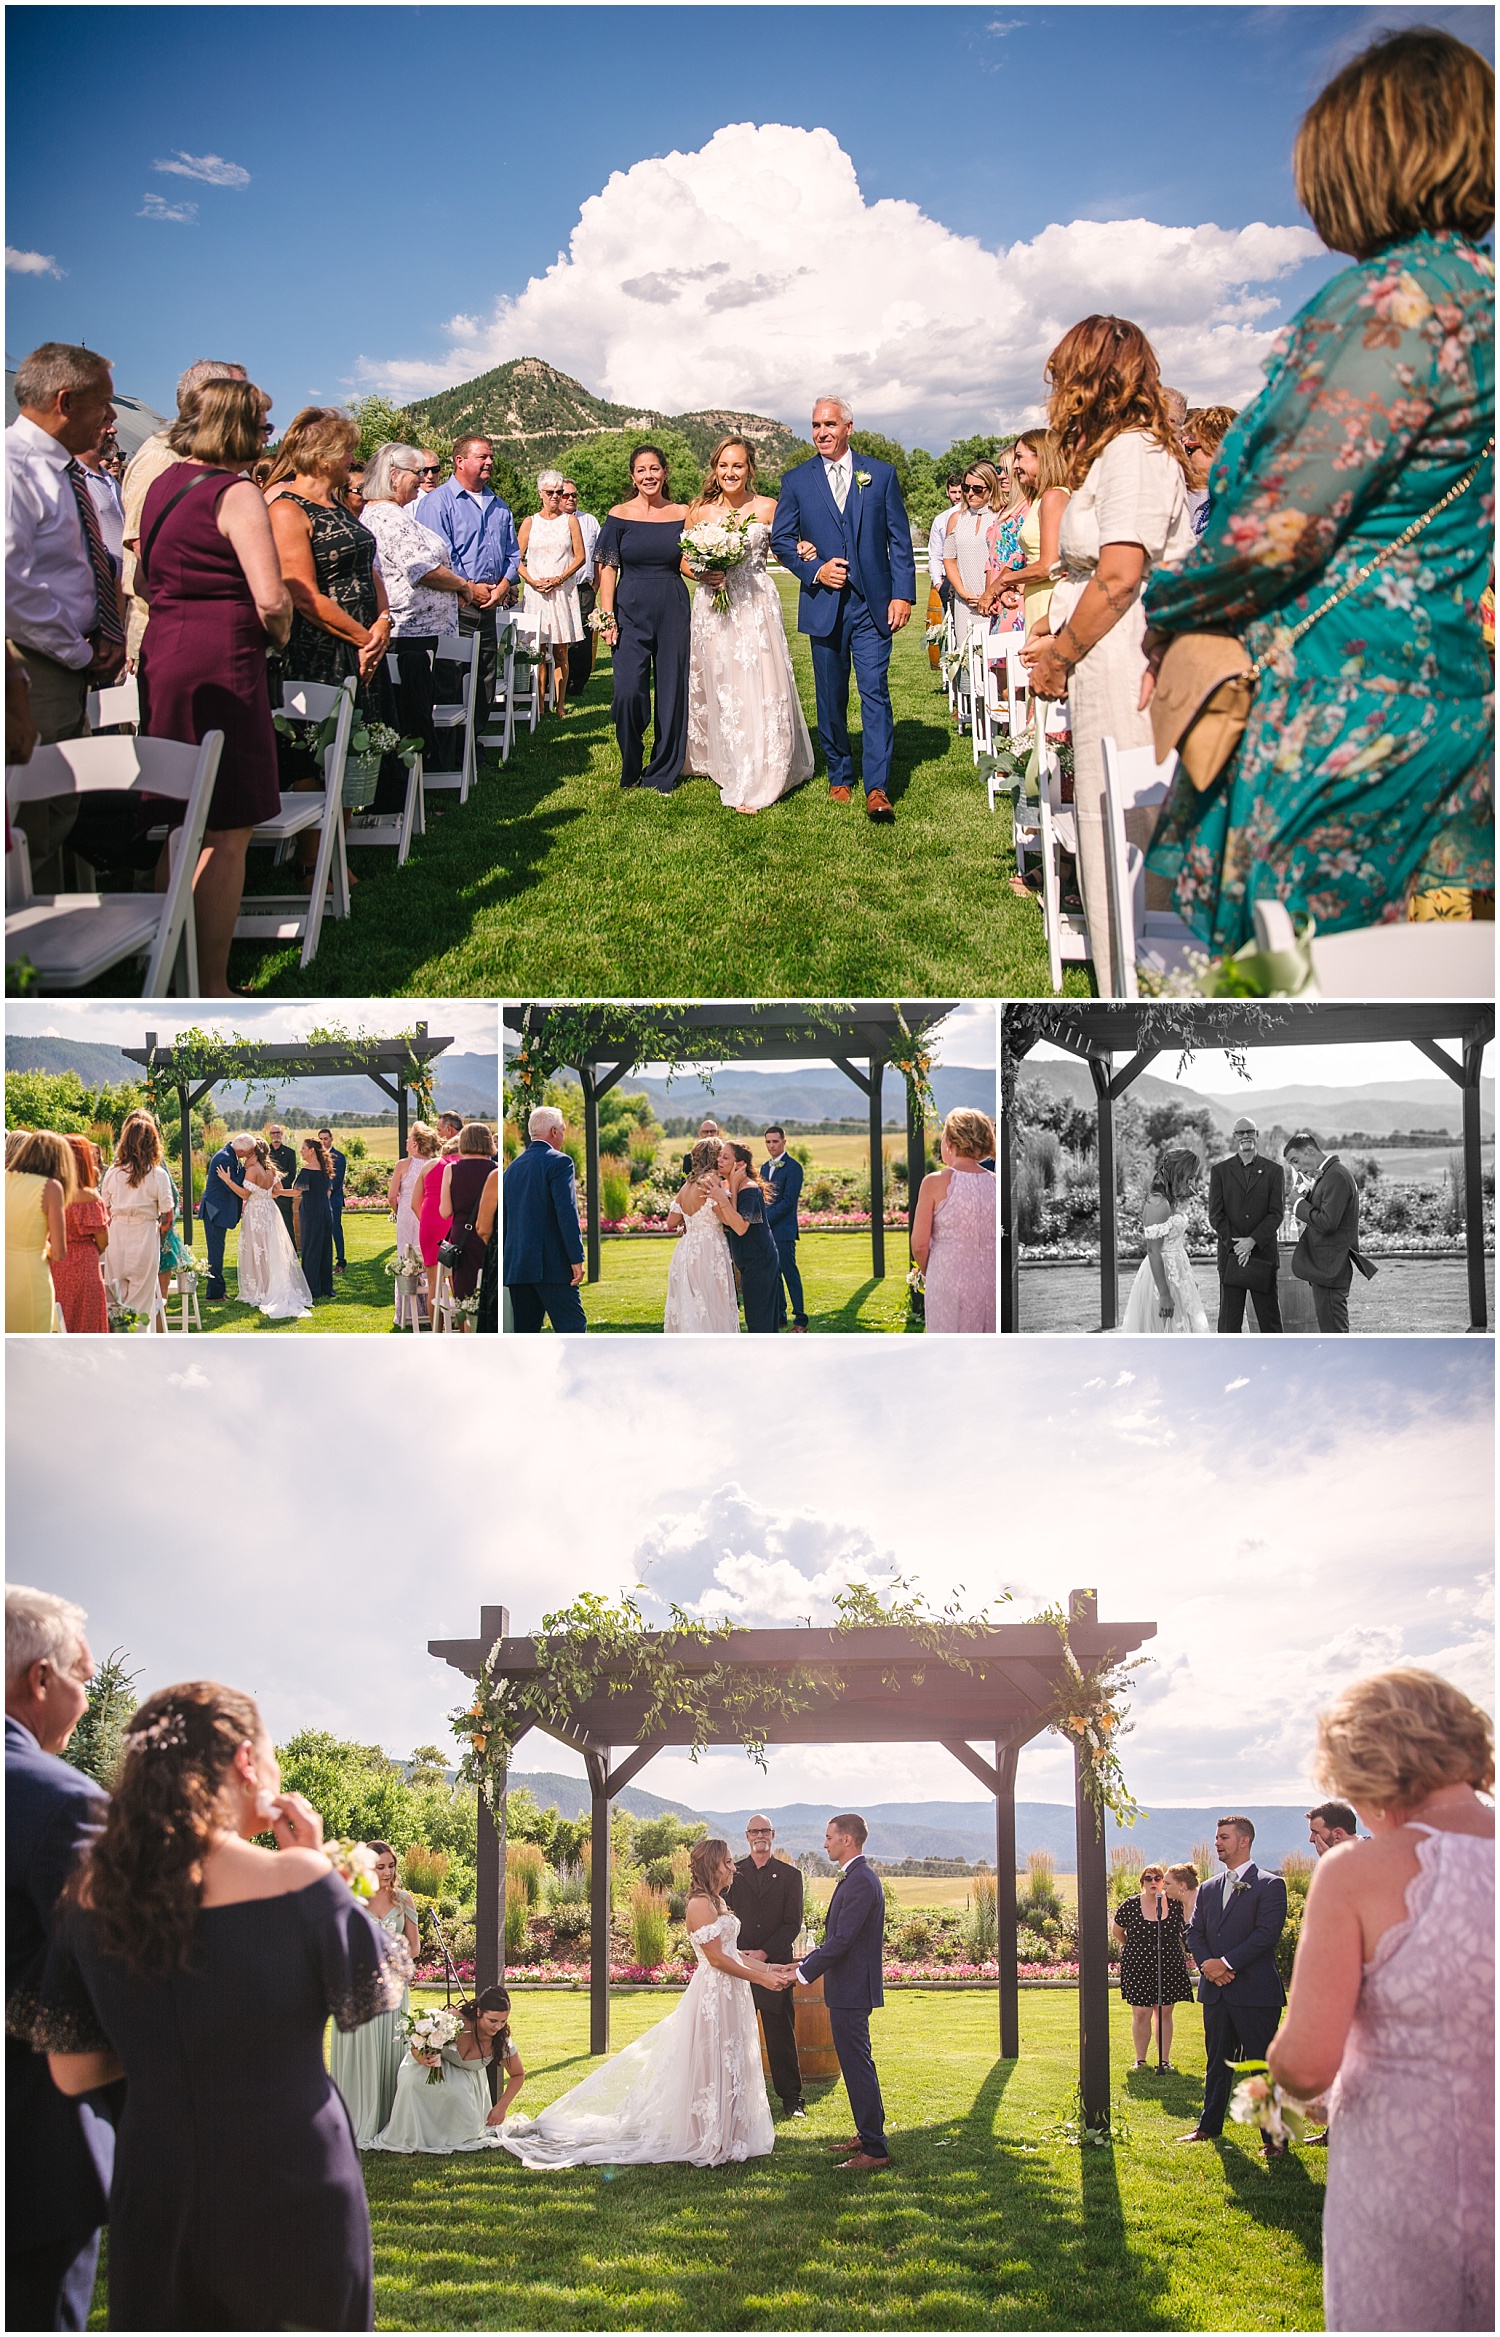 Crooked Willow Farms wedding ceremony overlooking the Rocky Mountains in Larkspur Colorado